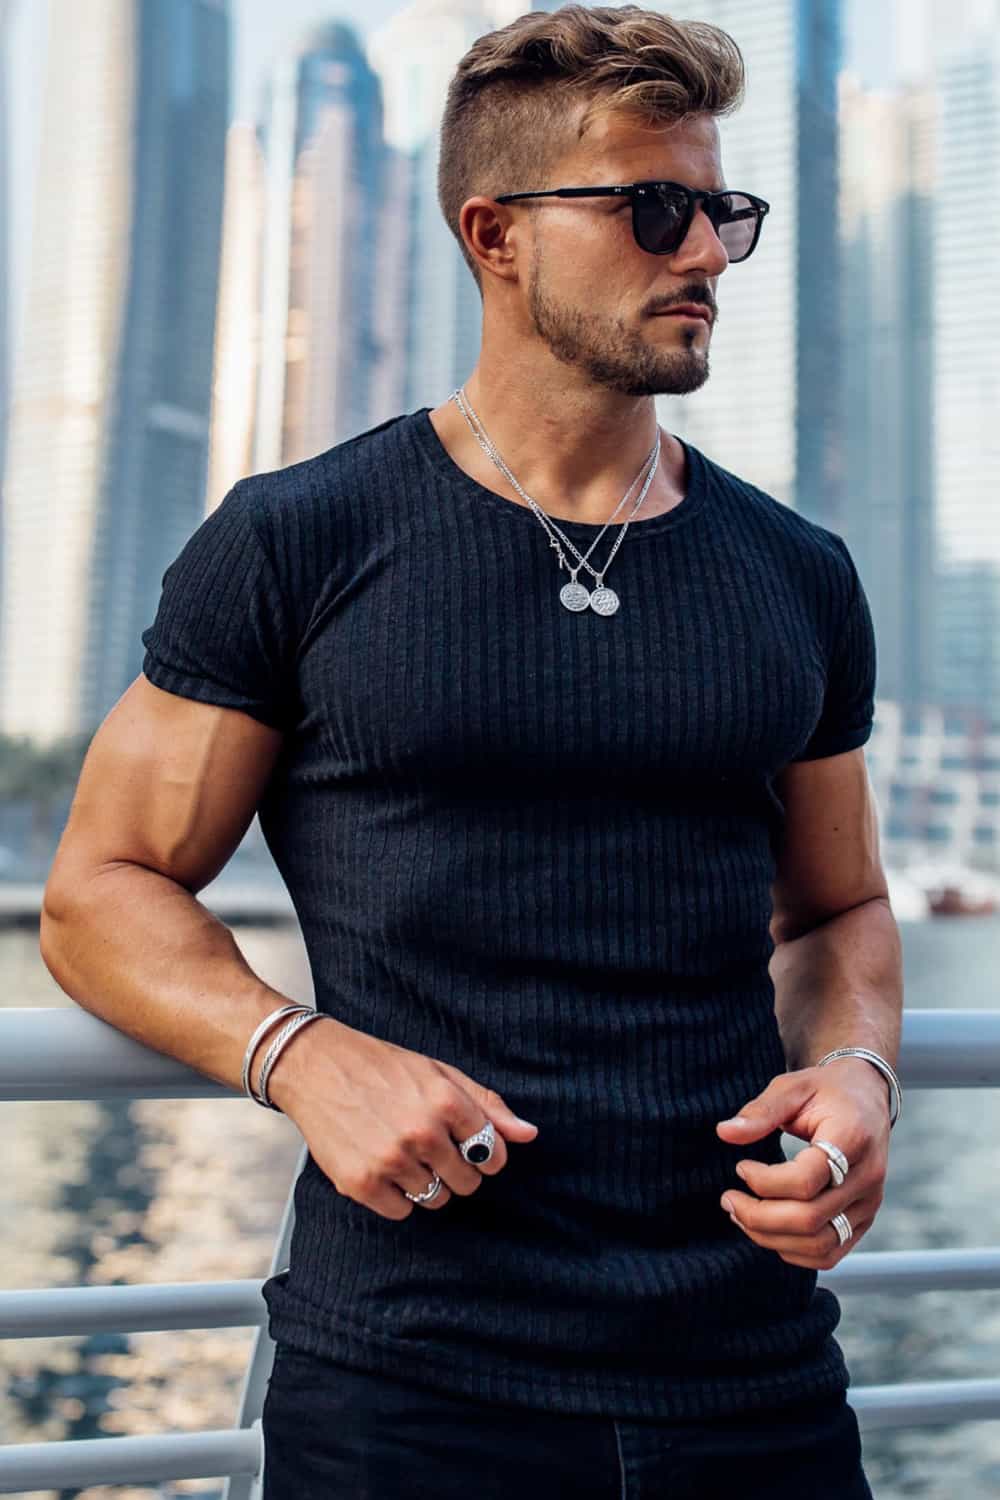 Men's Fashion Summer Outfits | Round Neck Short Sleeve – 3rdpartypeople